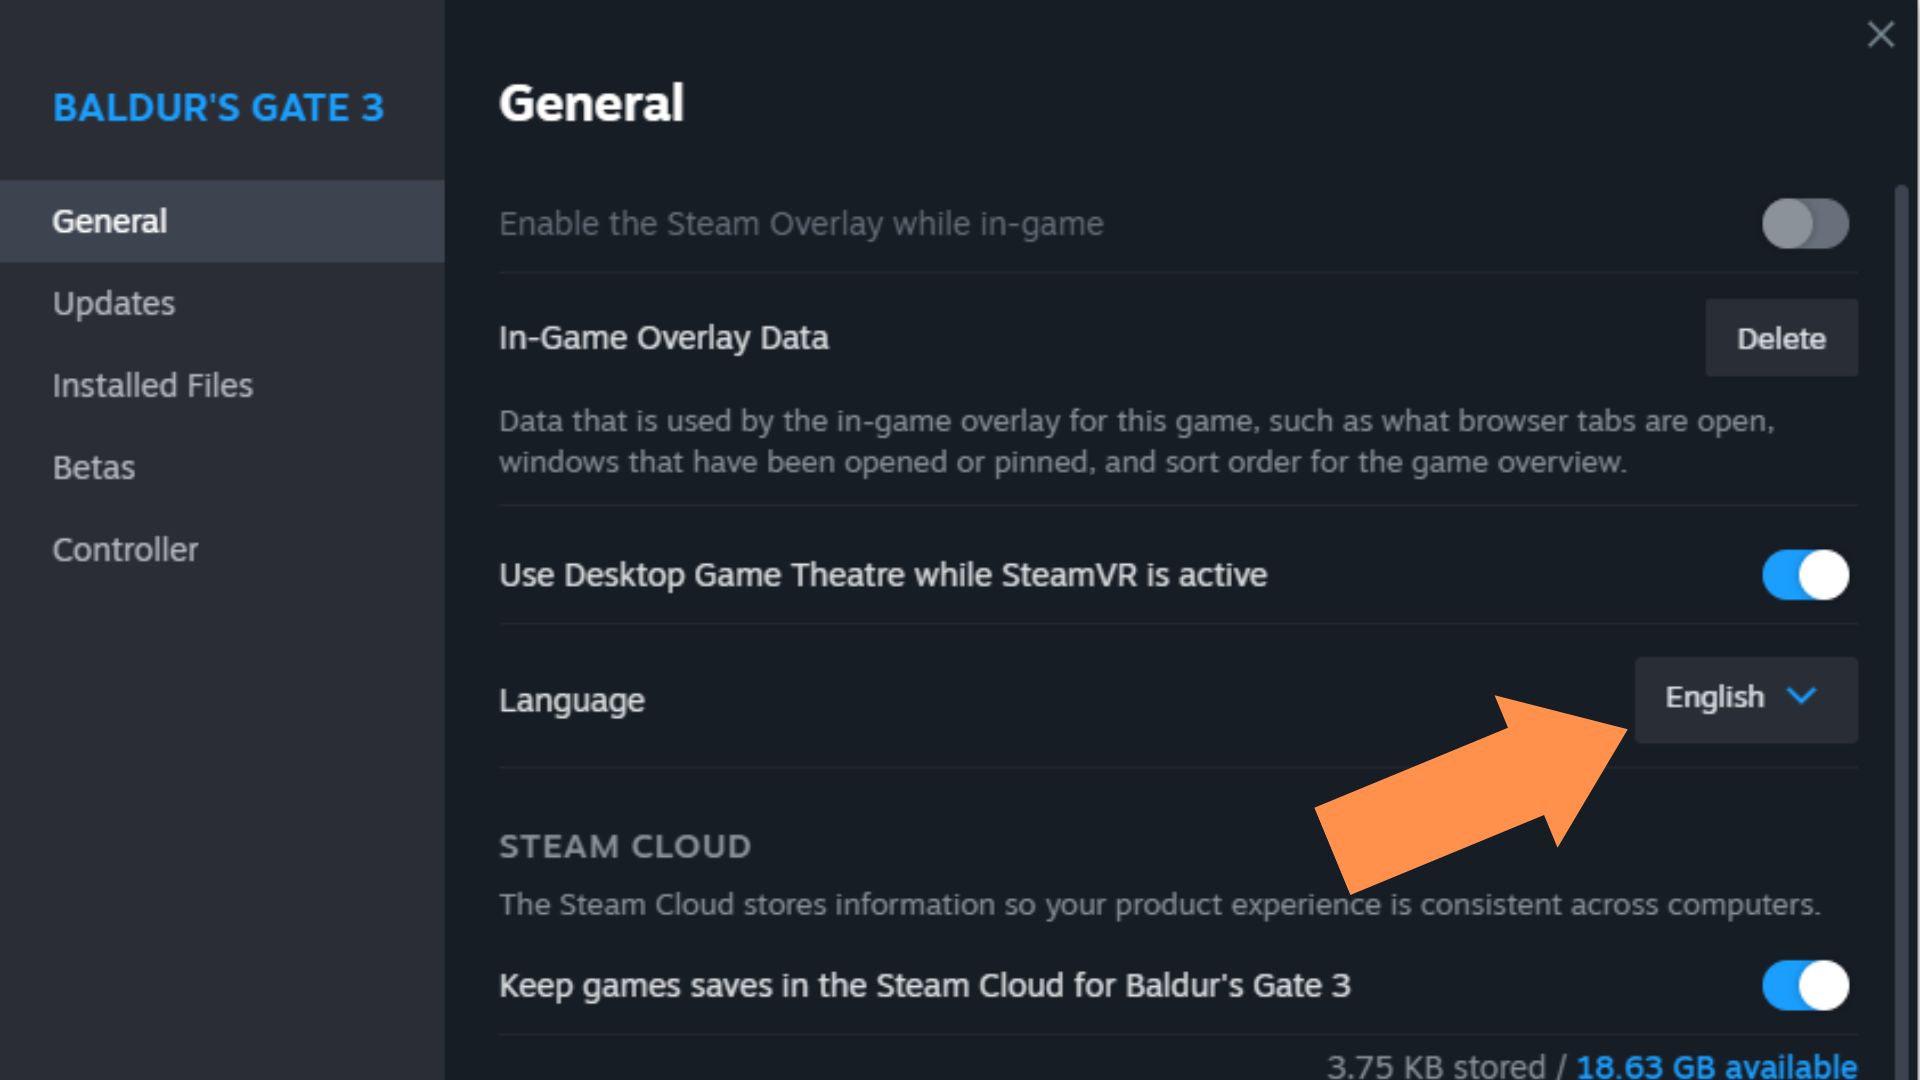 A screenshot showing the language option in the Steam Menu